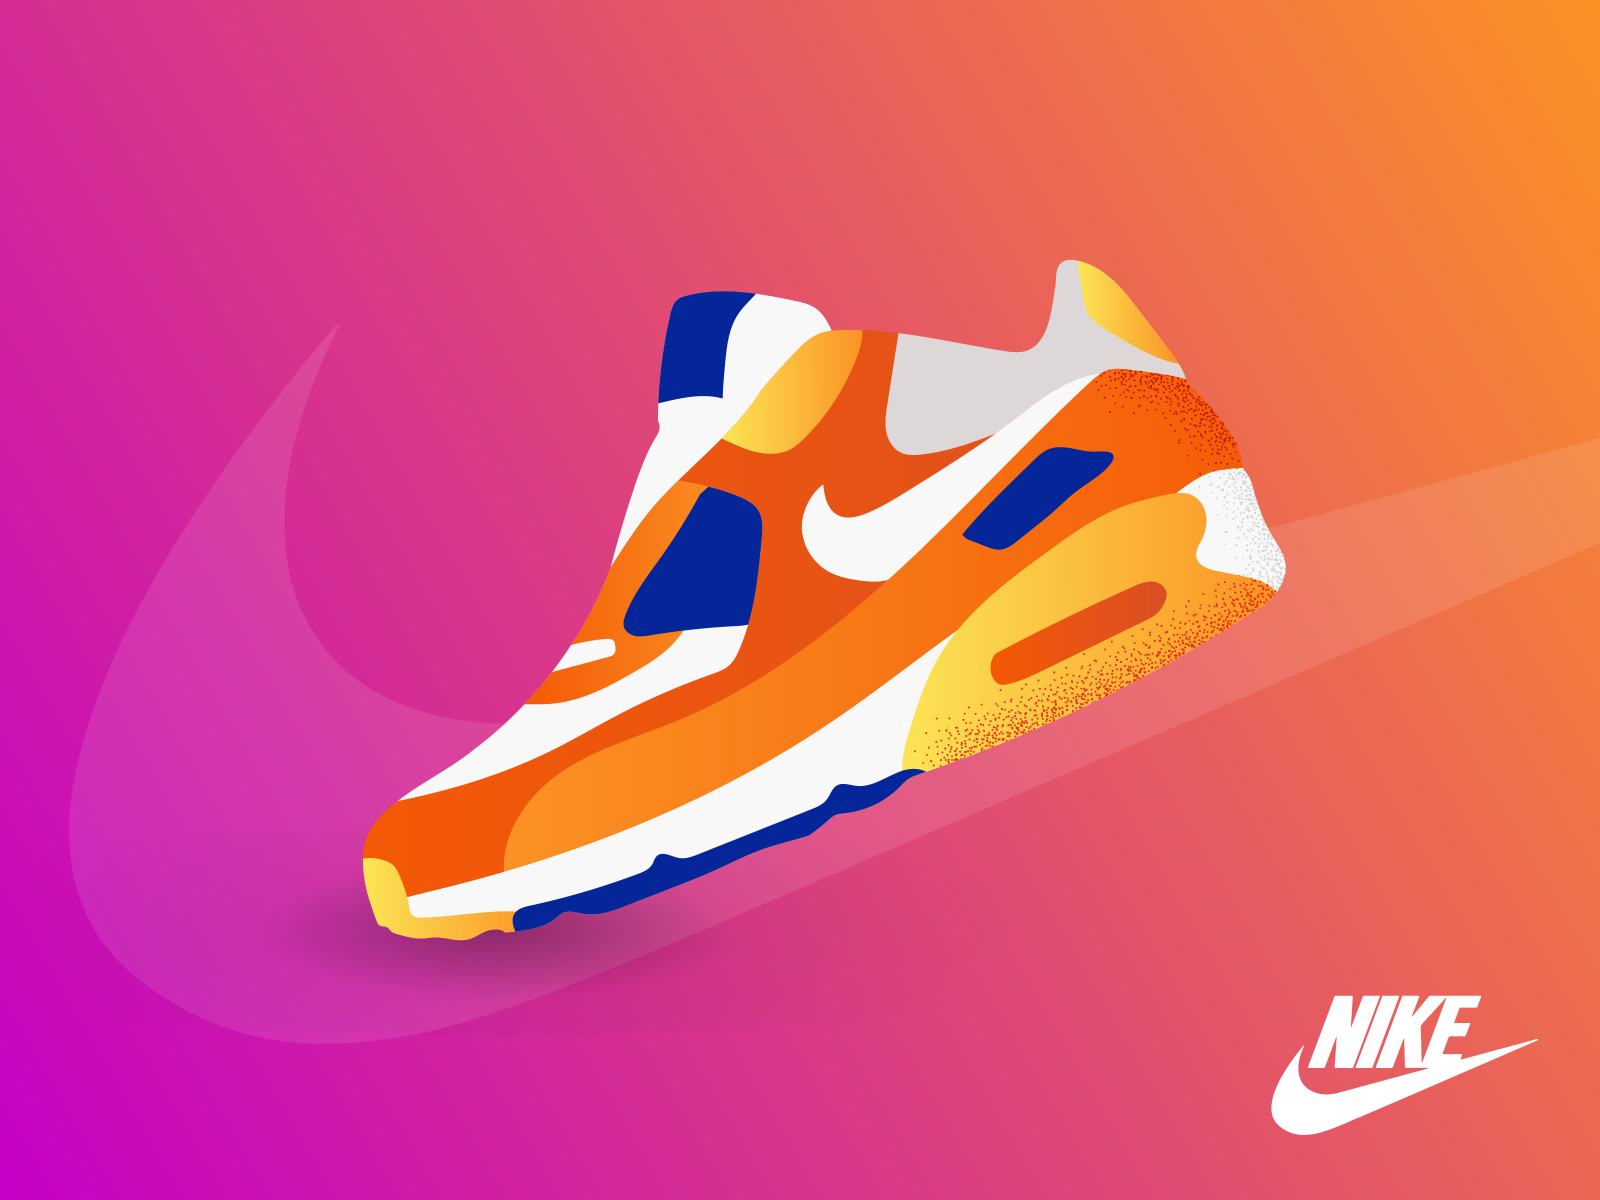 Unofficial Nike Air Max Digital Poster by Dio on Dribbble